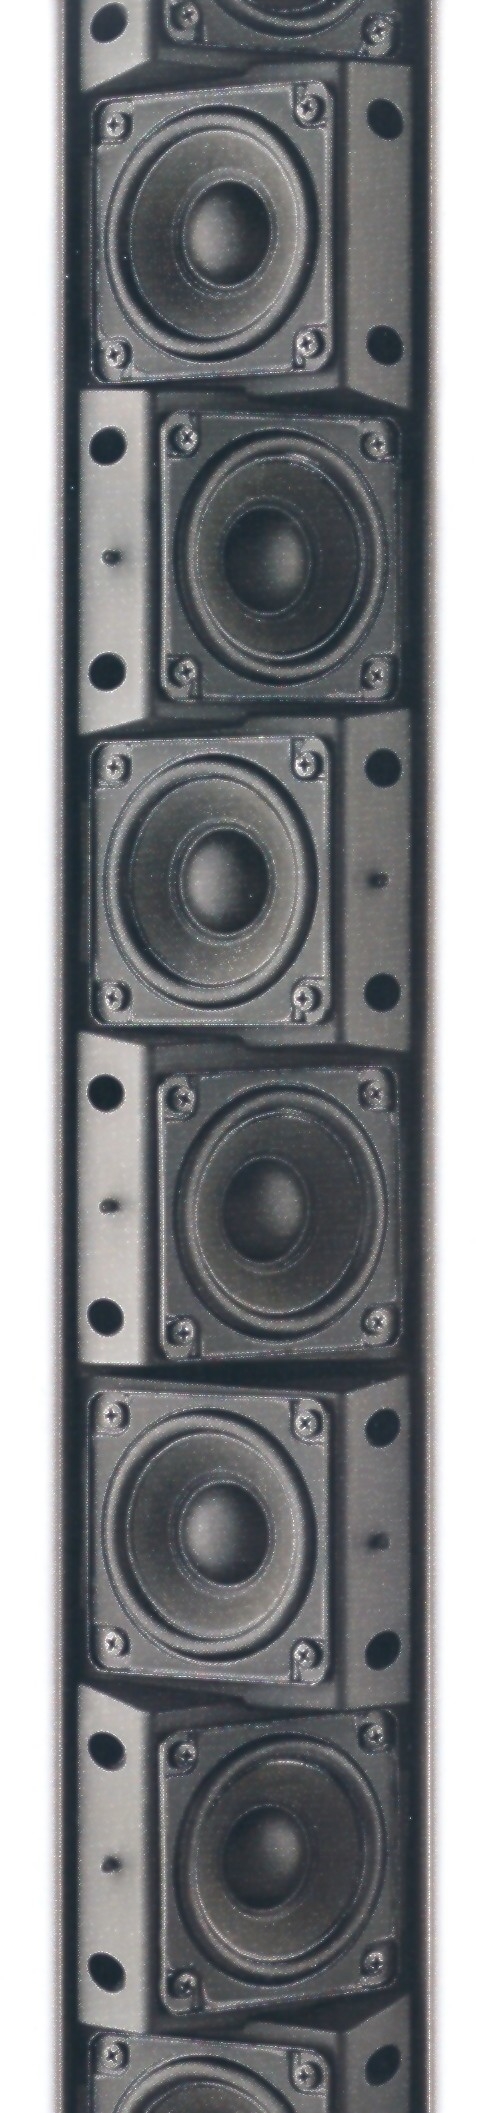 Speaker array behind the grille